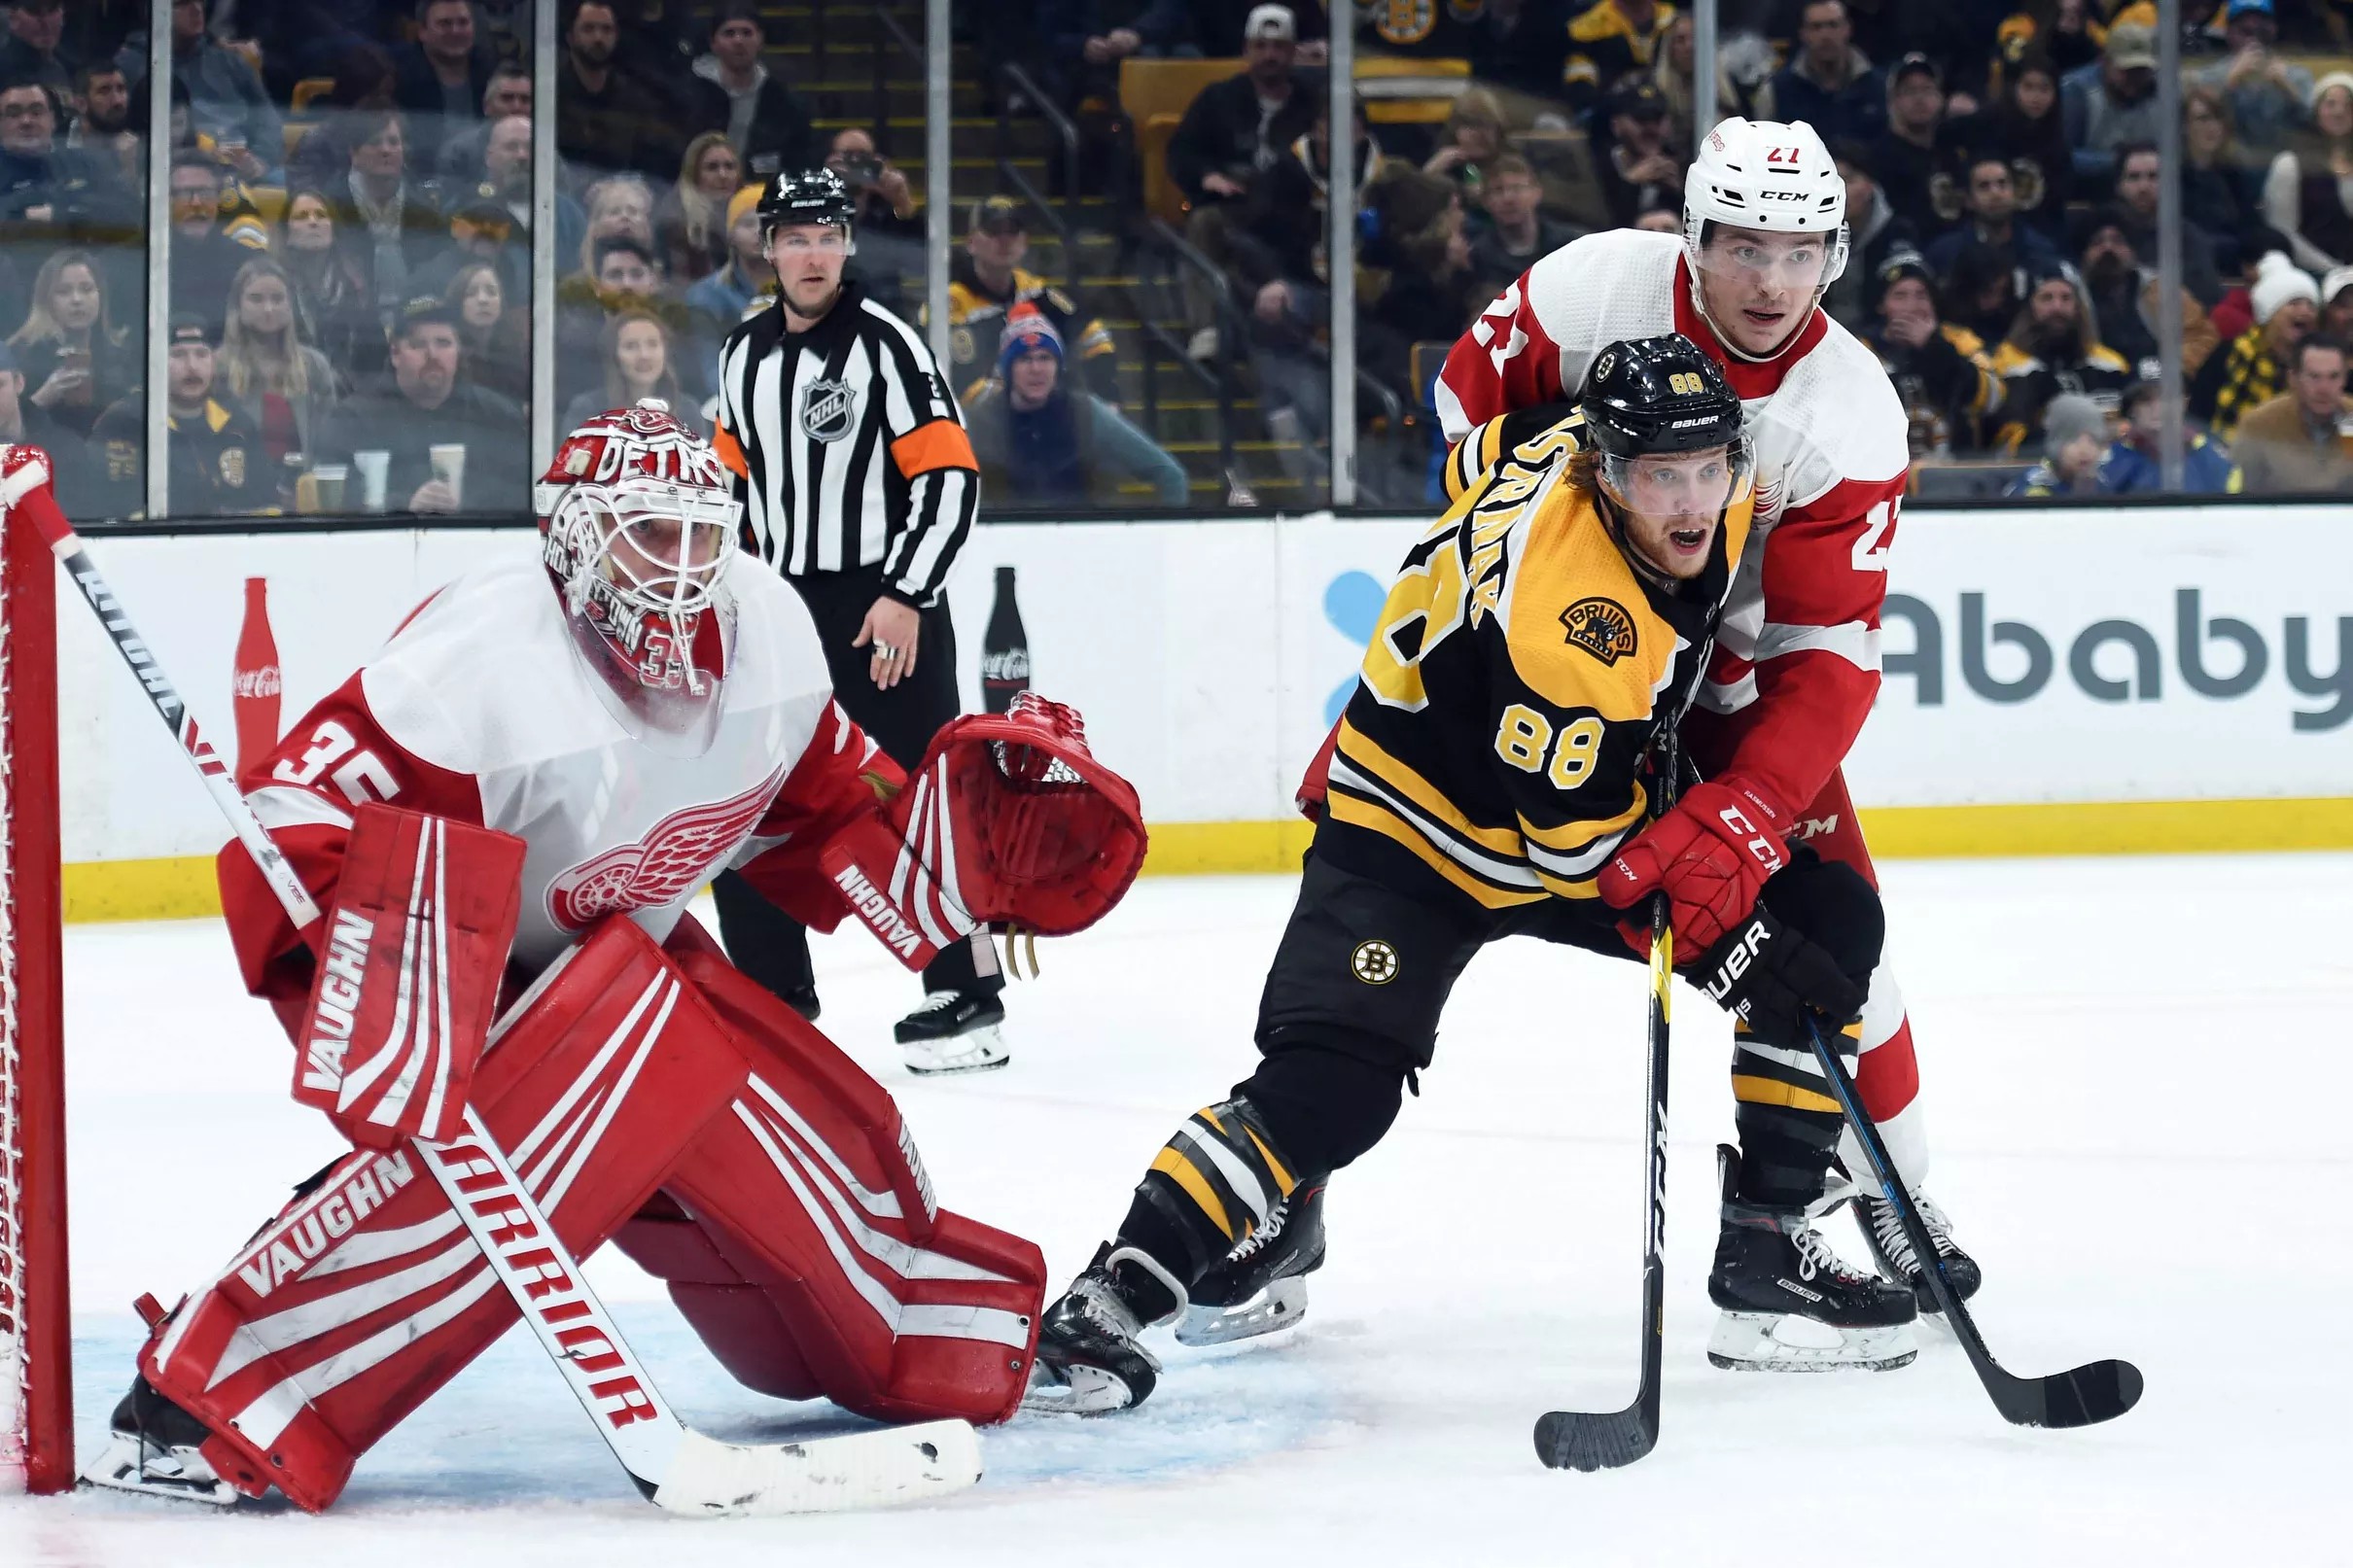 Bruins vs. Red Wings 3/31/19 PREVIEW